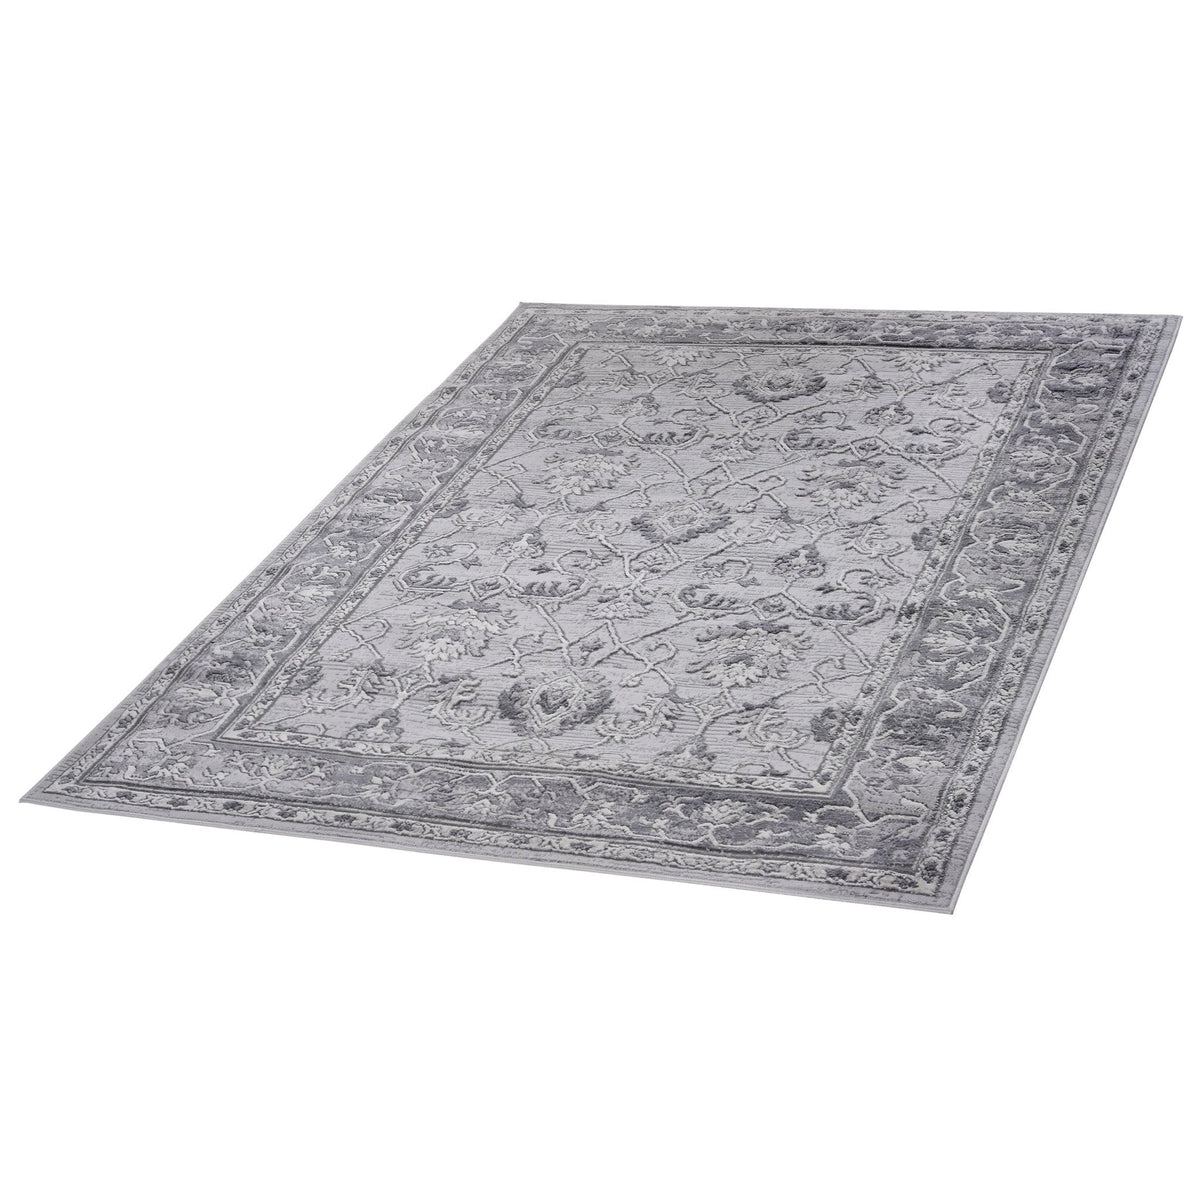 Marfi Grey Rug Size 5'3'' x 7'6'' | Mid in Mod | Houston TX | Best Furniture stores in Houston